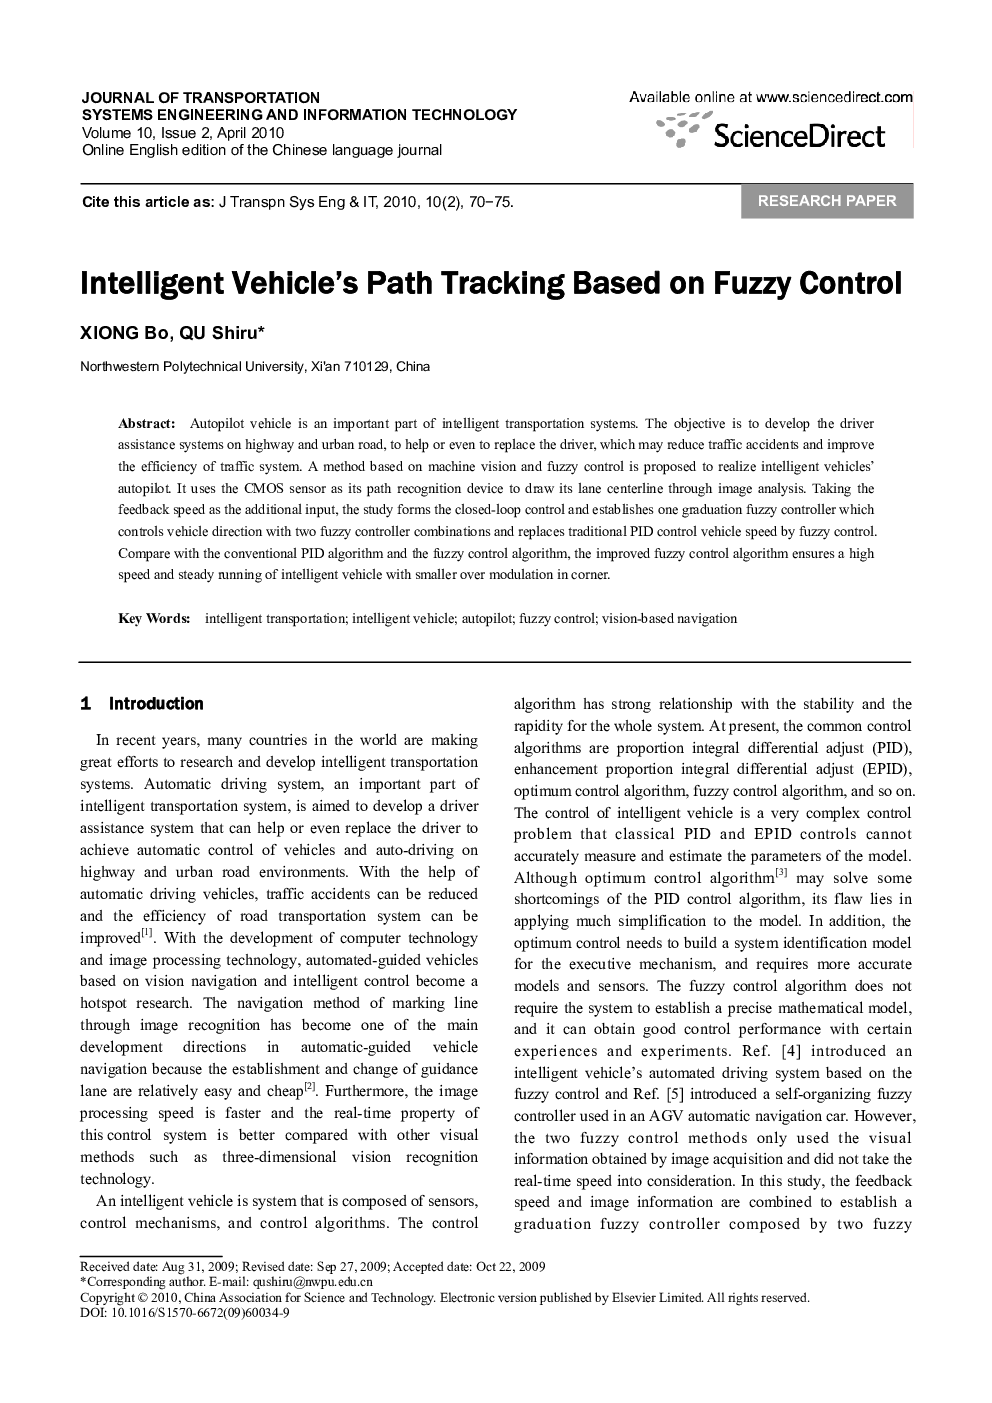 Intelligent Vehicle's Path Tracking Based on Fuzzy Control